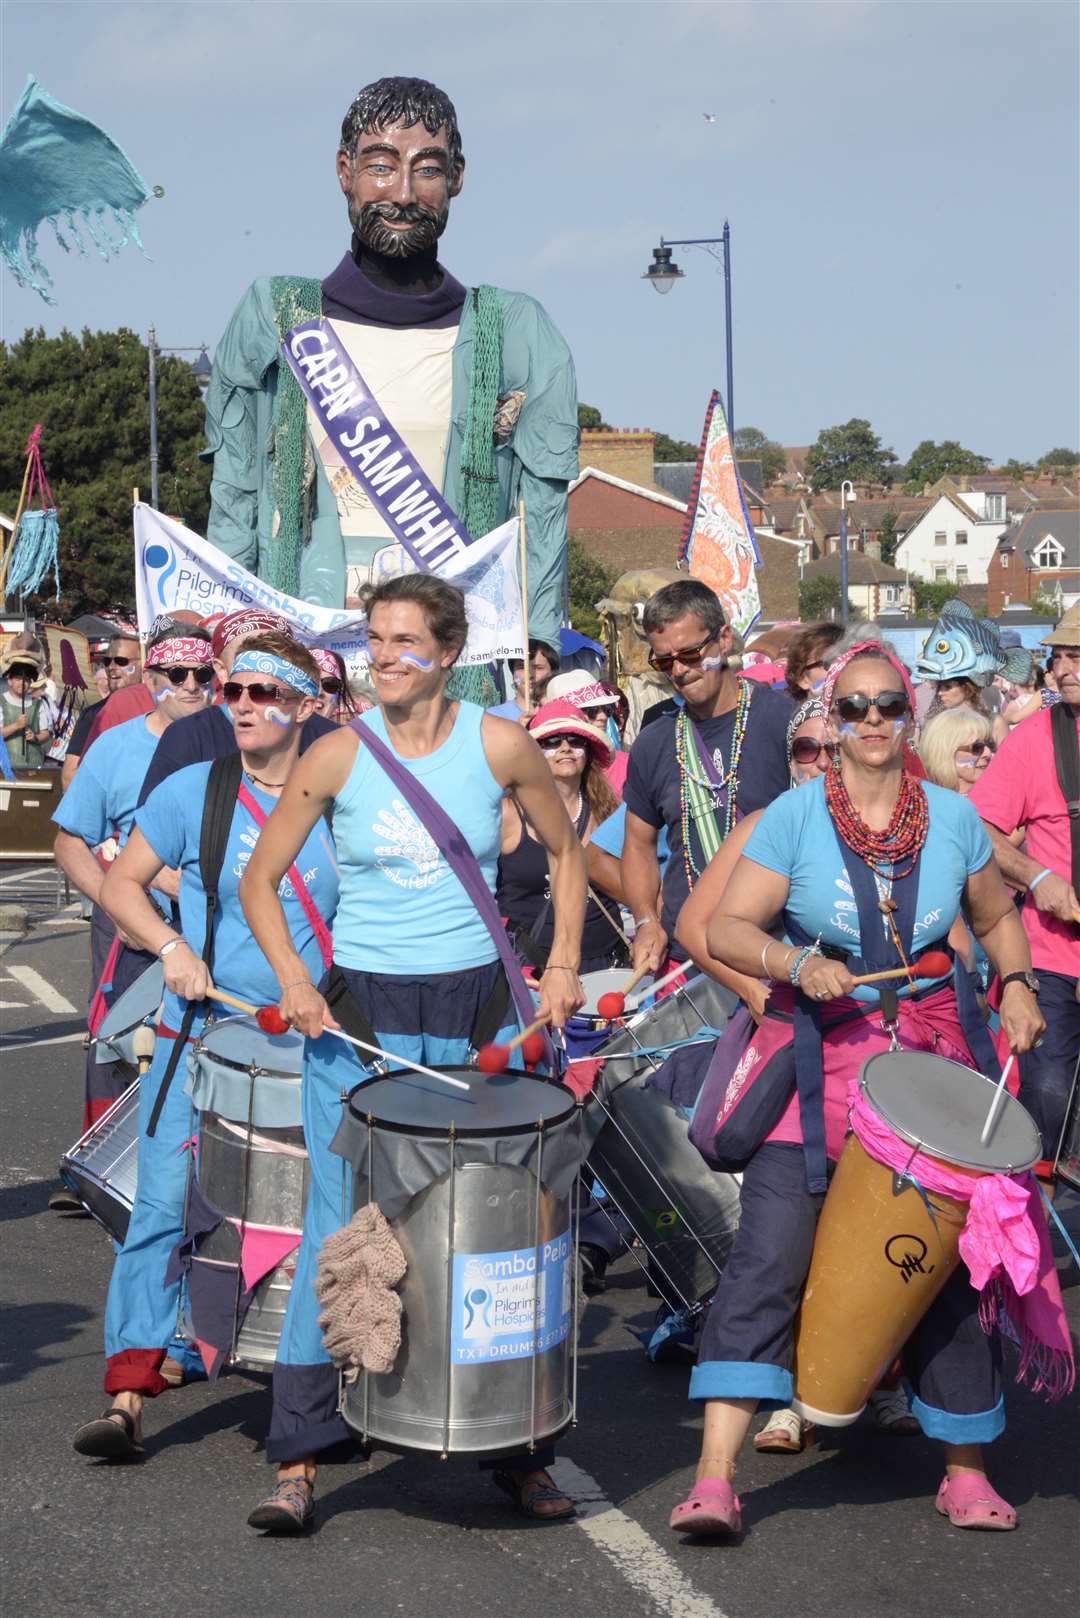 The Whitstable Oyster Festival parade